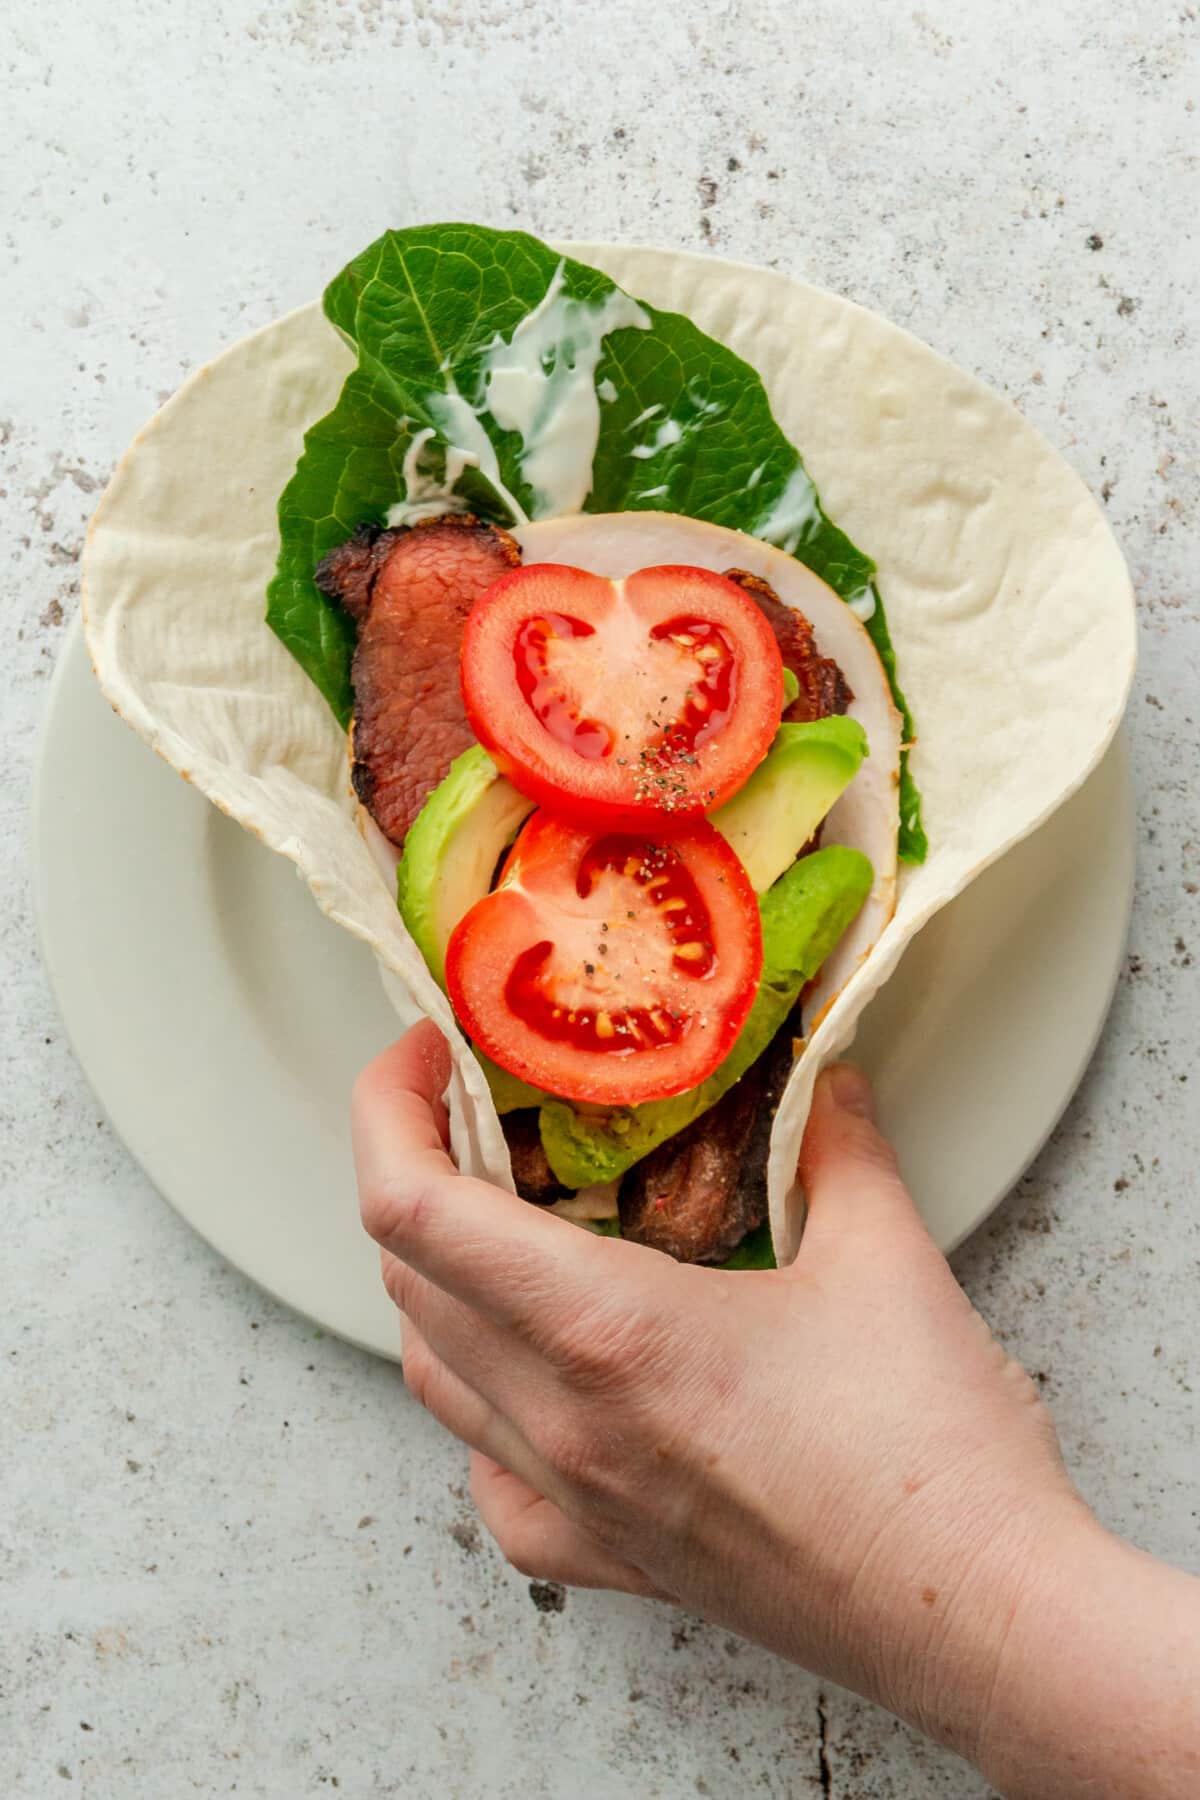 A turkey avocado wrap is picked up from a white ceramic plate on a light grey surface.